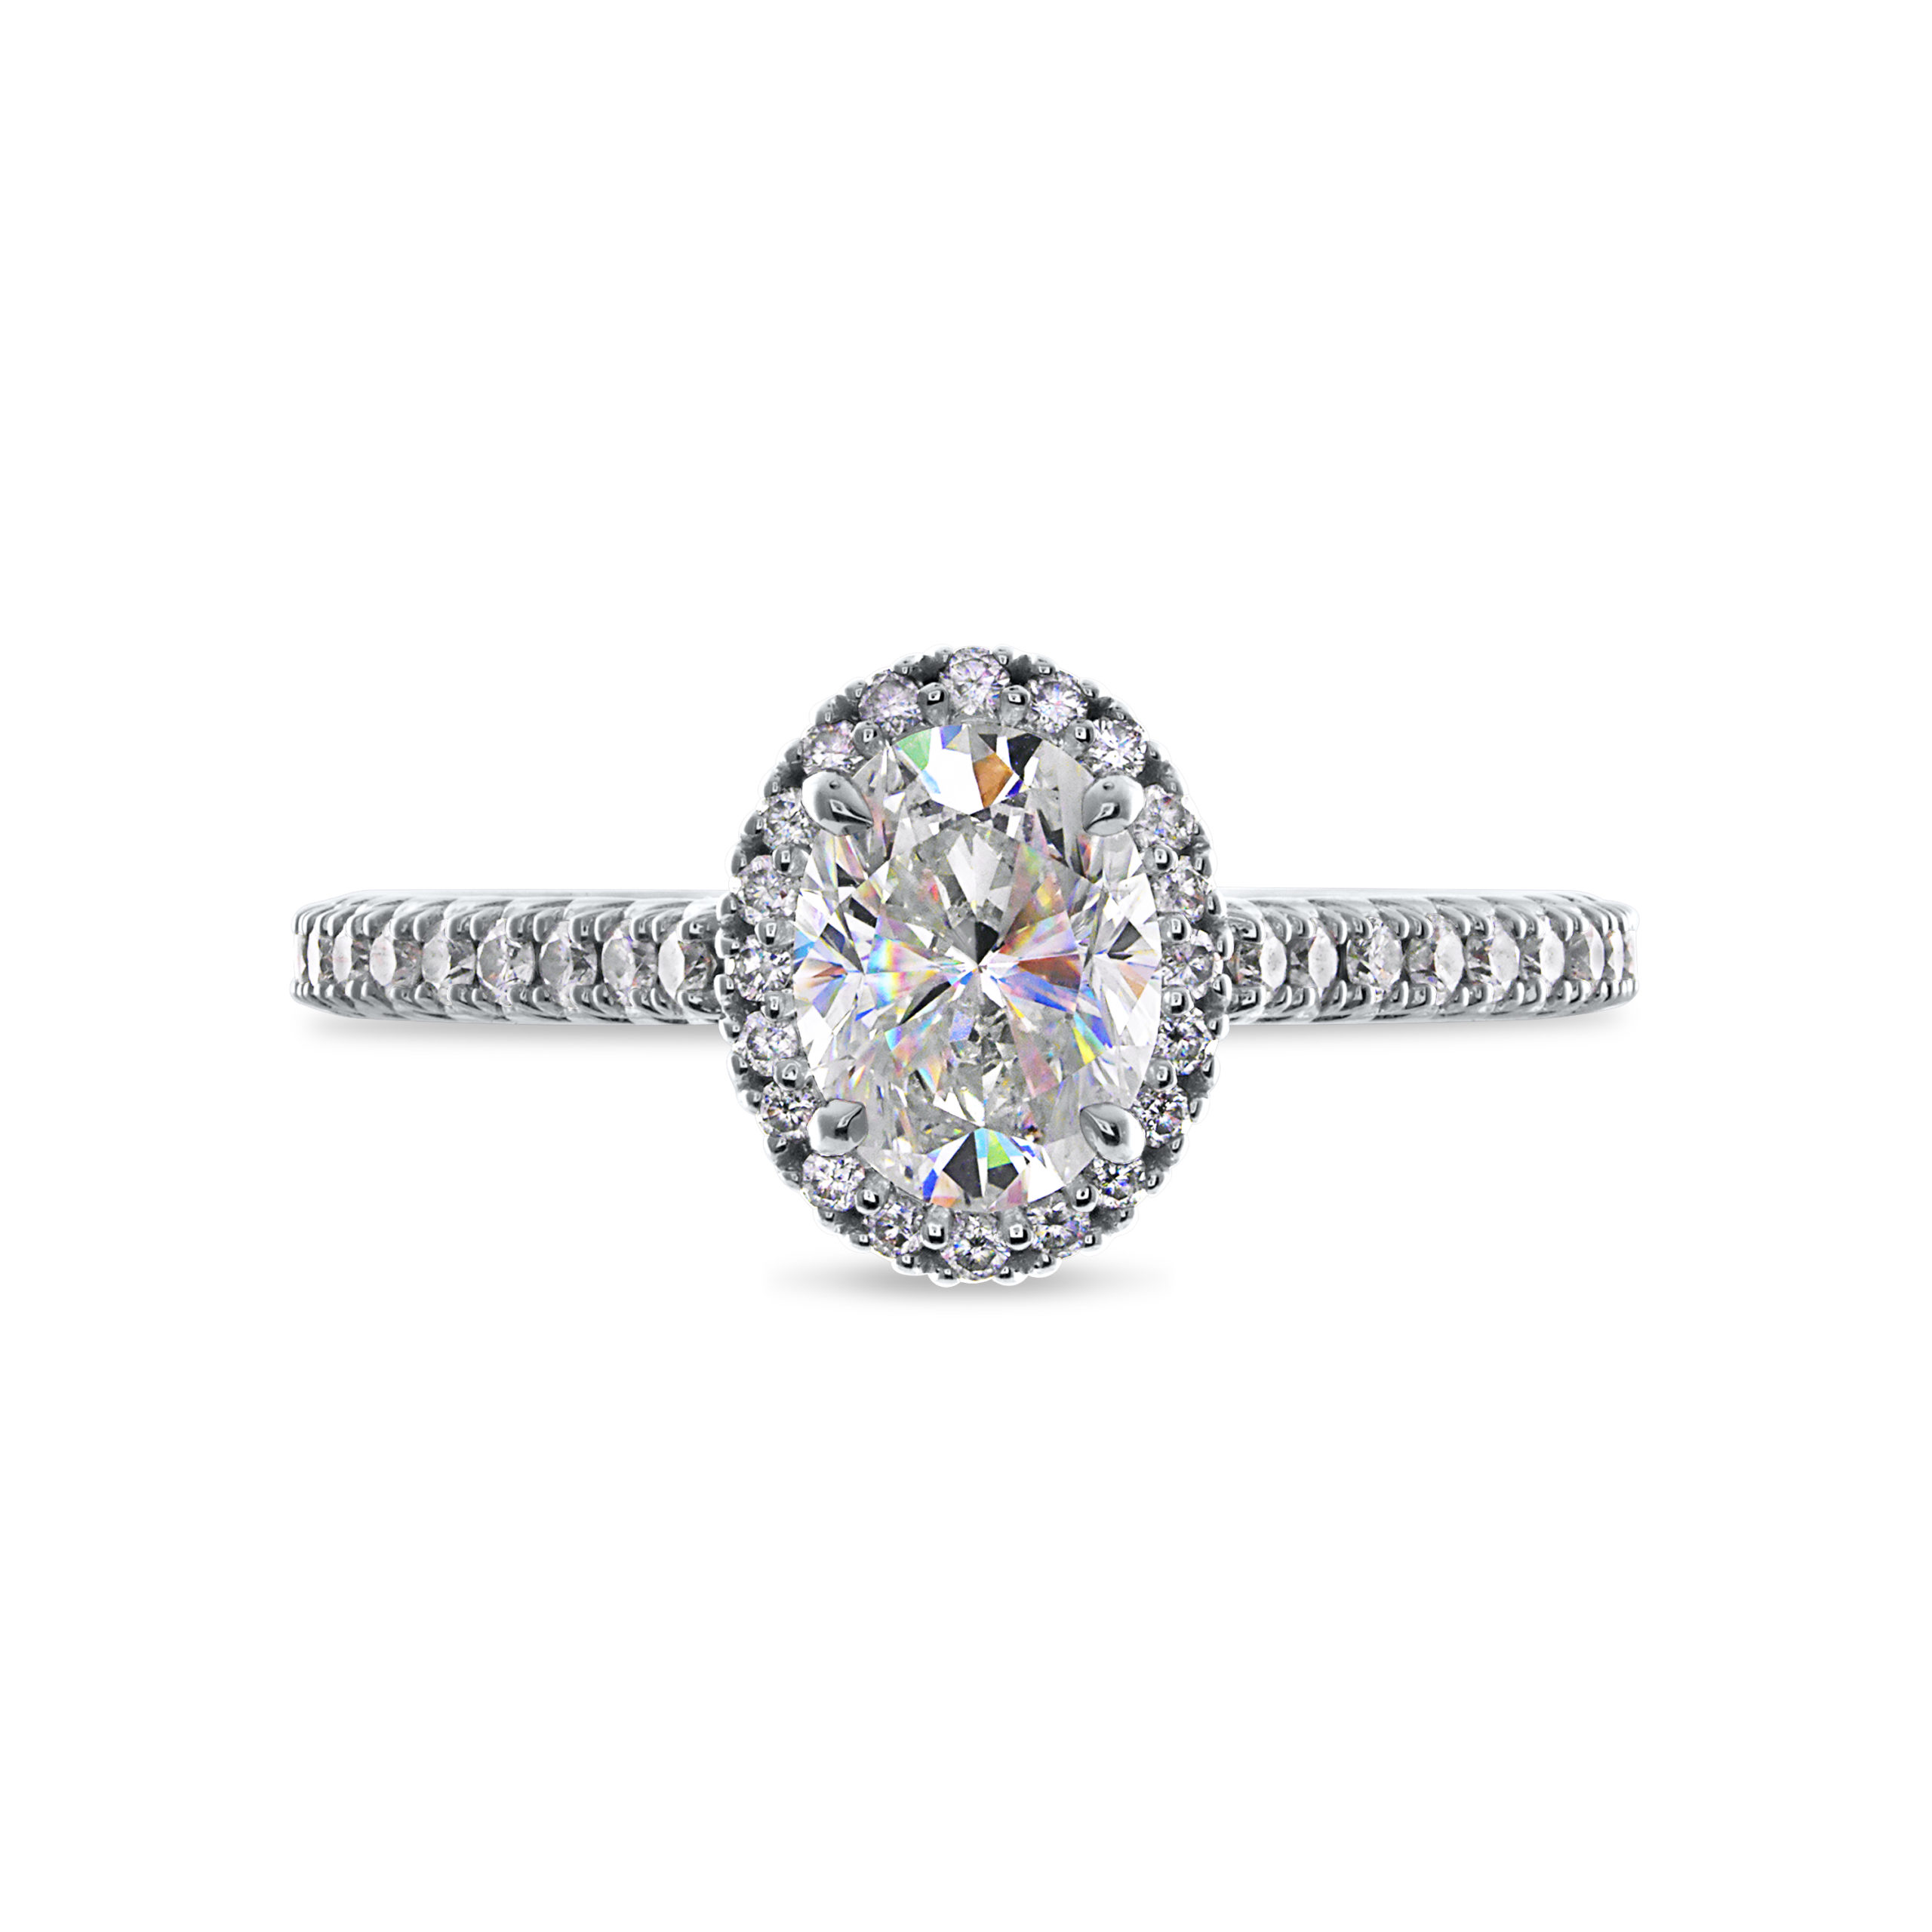 Facets of Fire Oval Dia Micropave Halo Ring